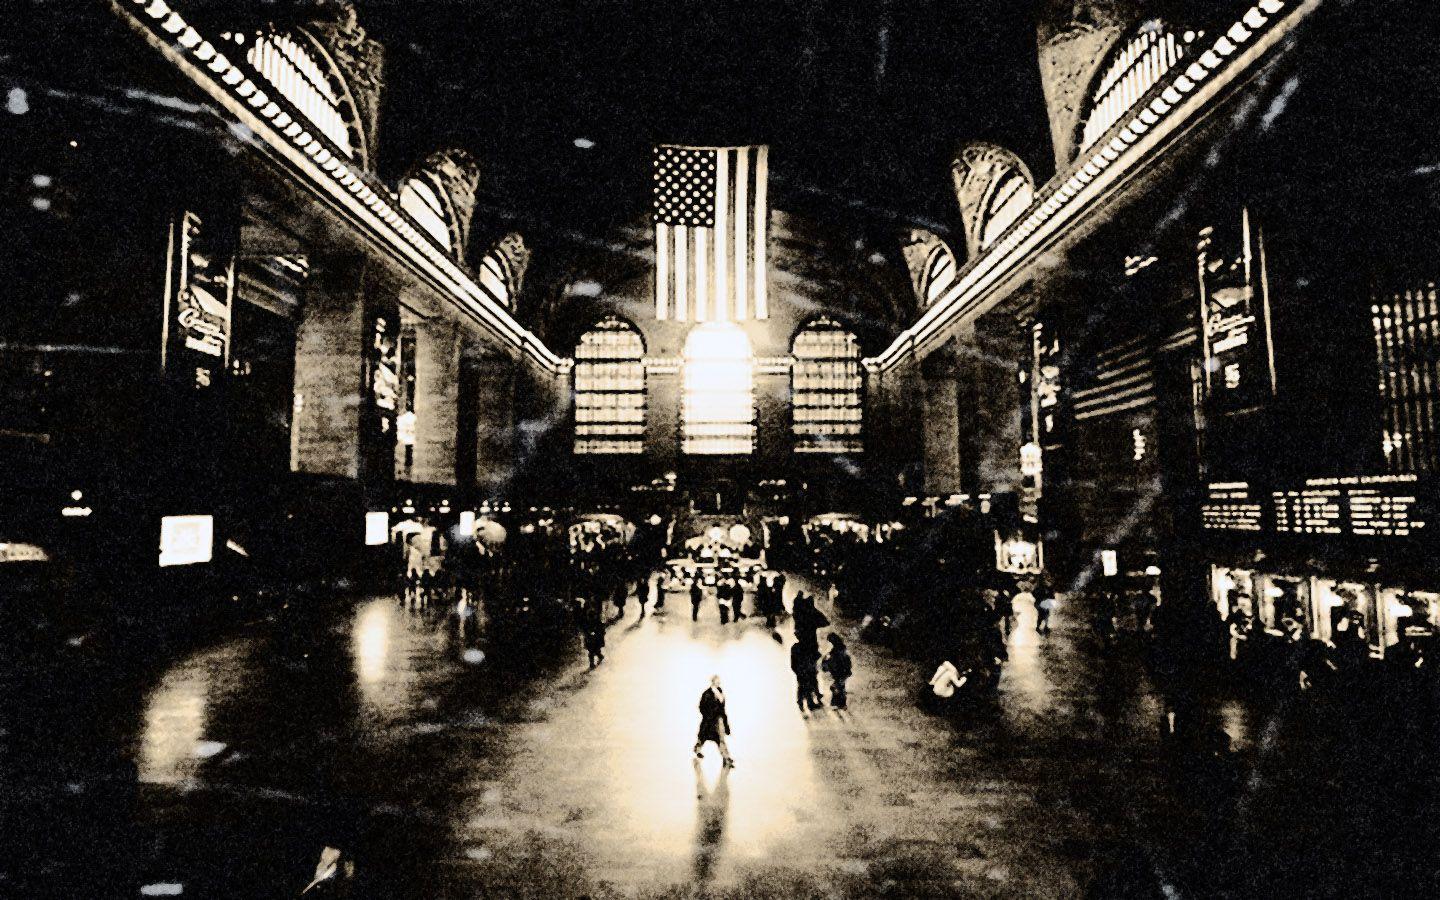 Wallpaper  nyc grand central bw rx100 Sony urban city train  station 2676x1784   946025  HD Wallpapers  WallHere